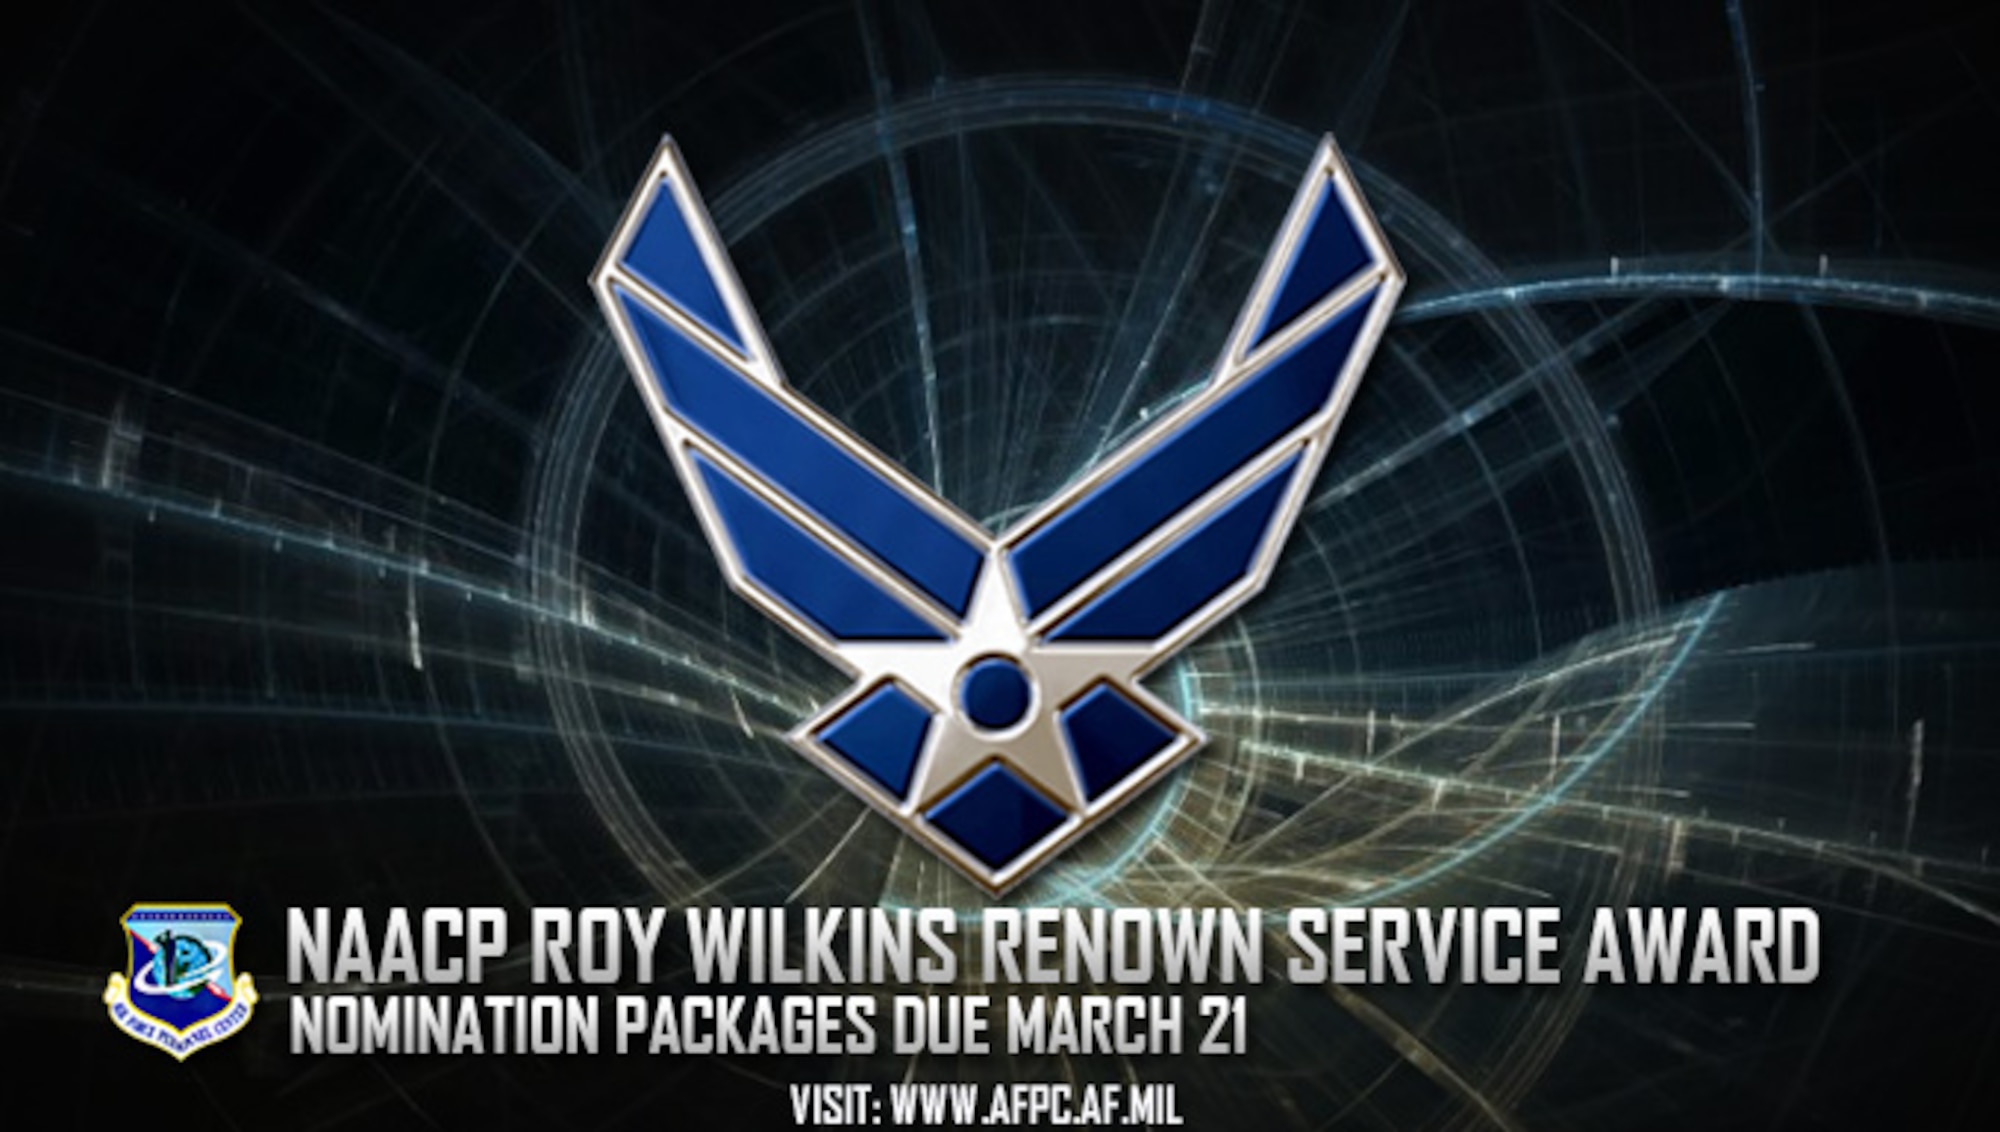 Nominations for the 2018 National Association for the Advancement of Colored People Roy Wilkins Renown Service Award are due to the Air Force’s Personnel Center by March 21, 2018. The award honors military members and Department of Defense civilian employees who have supported the DOD mission or overseas contingency operations, or whose attributes epitomize the qualities and core values of their respective military service. (U.S. Air Force graphic by Staff Sgt. Alexx Pons)